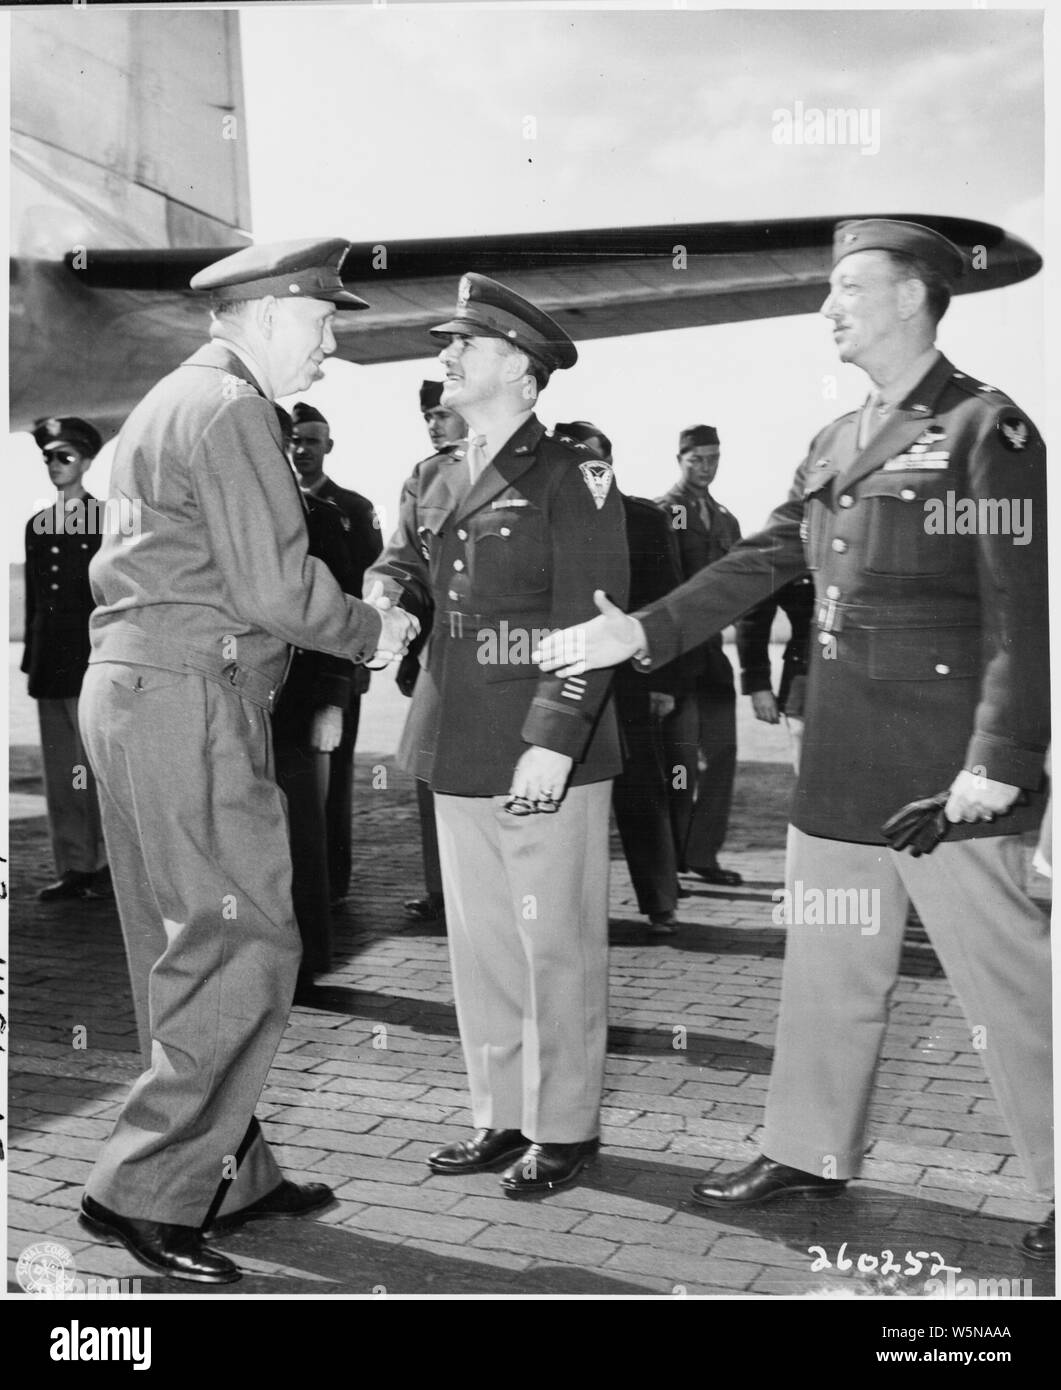 Gen. George C. Marshall shakes hands with Maj. Gen. John R. Deane, center, as Brig. Gen. Ben Stewart Cutler extends his hand in greeting at Gatow Airport in Berlin, Germany at the beginning of the Potsdam Conference. Stock Photo